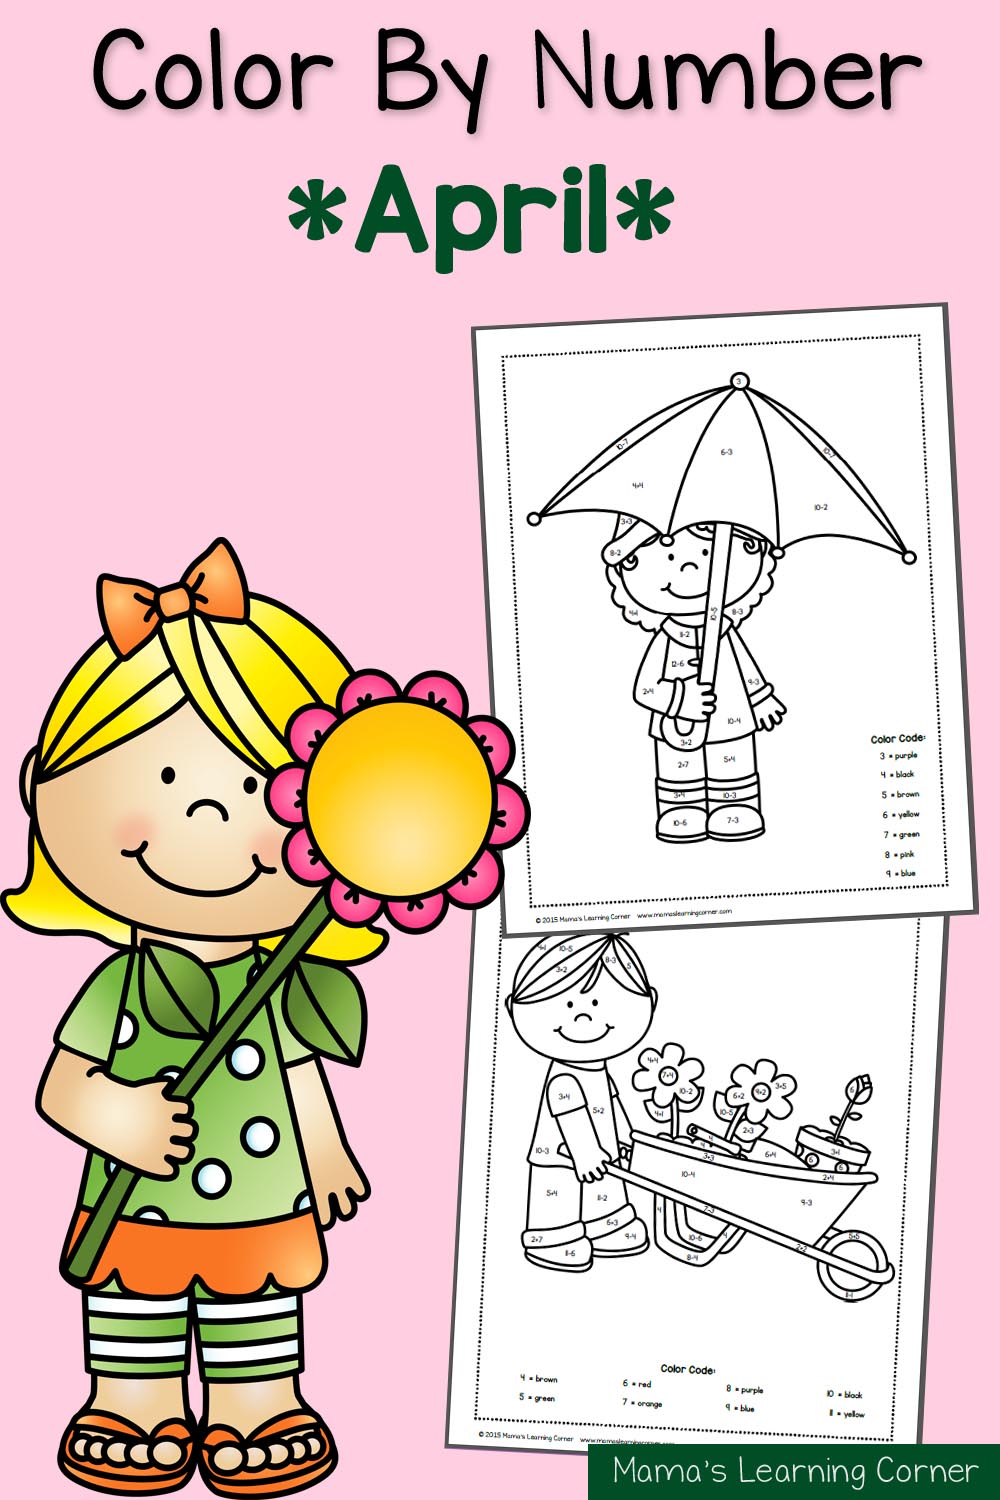 color-by-number-worksheets-spring-mamas-learning-corner